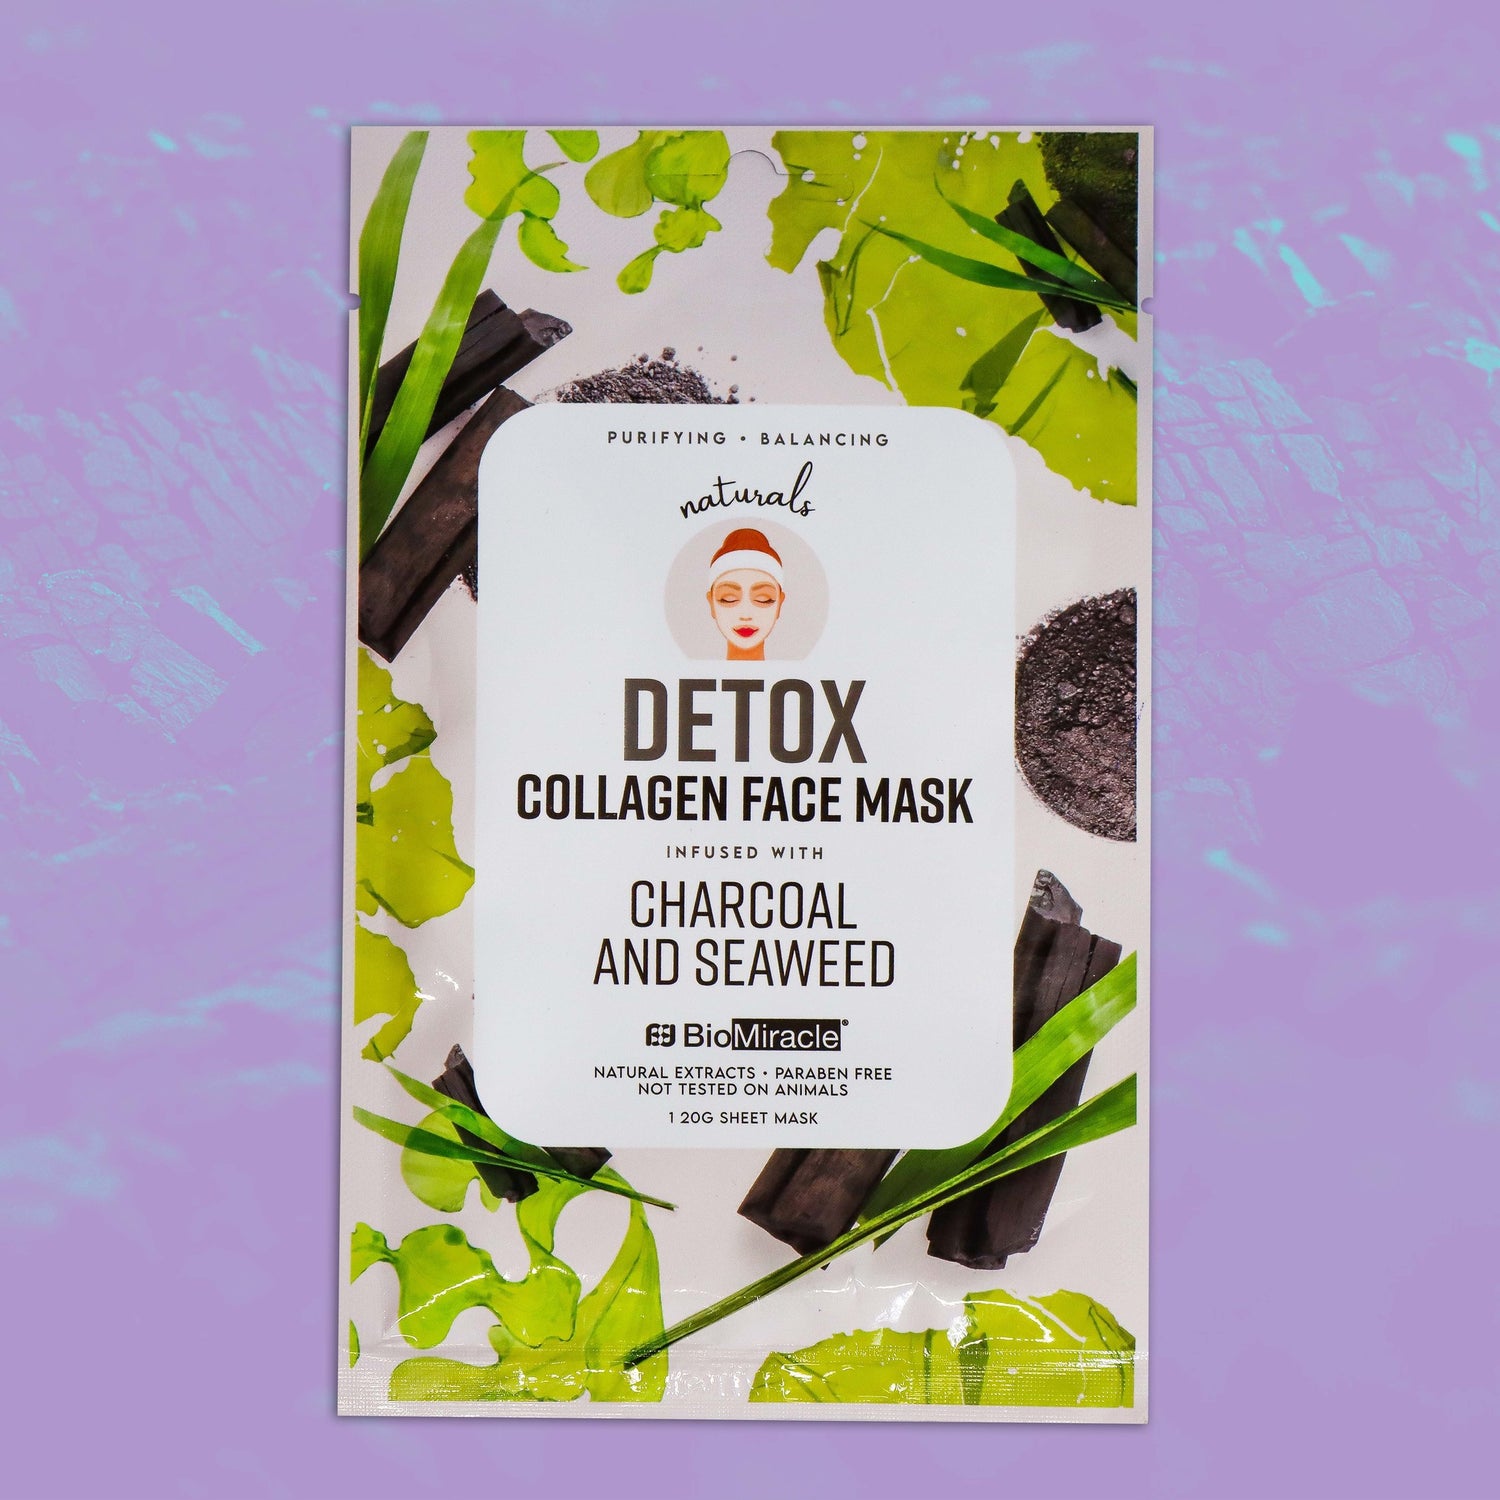 Detox Collagen Face Mask Infused with Charcoal and Seaweed-10 Pack